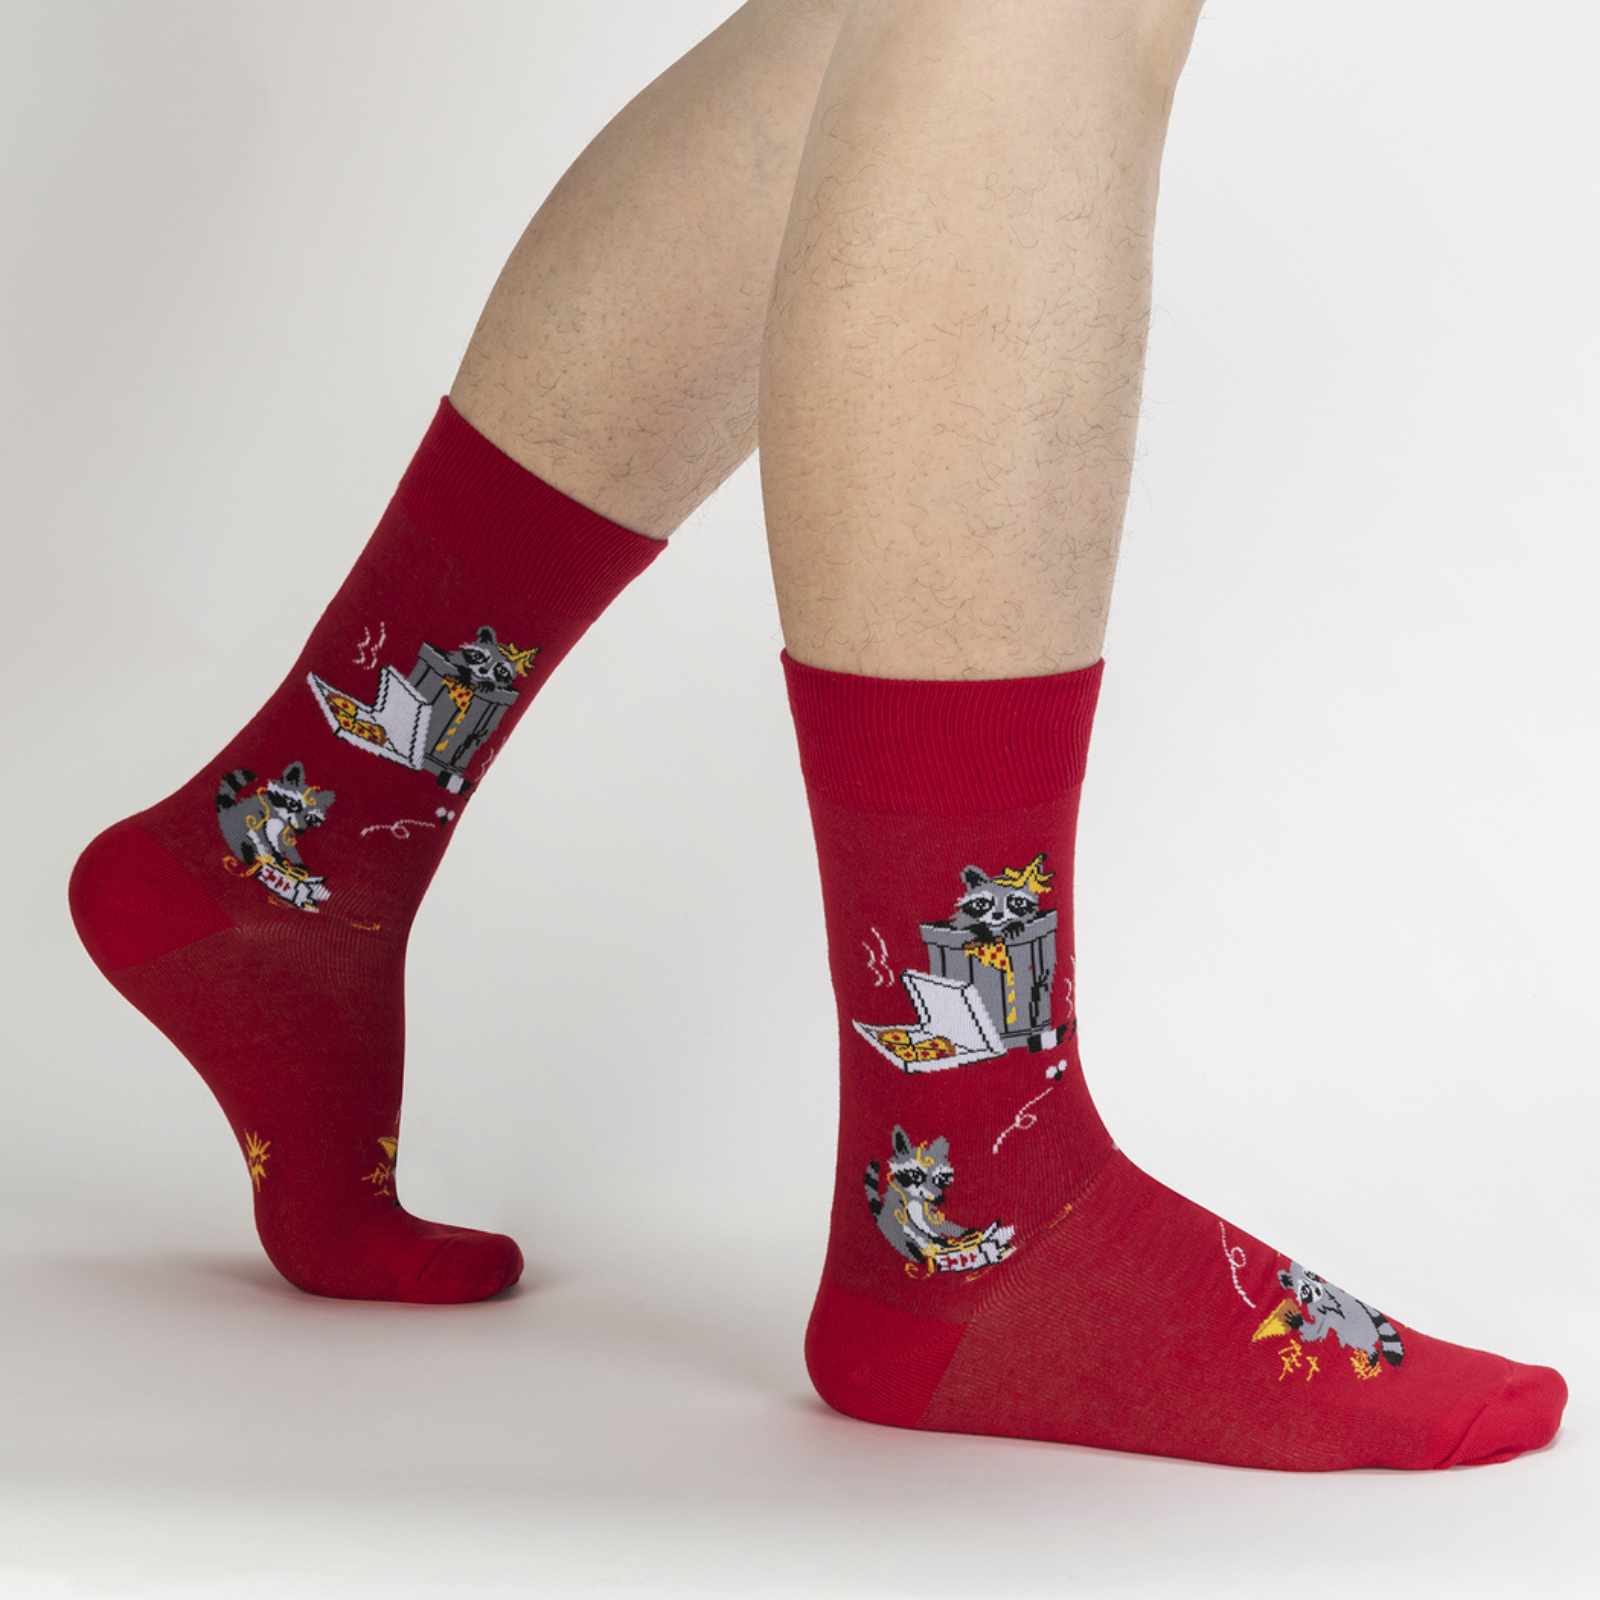 Sock It To Me Trash Panda men's sock featuring red crew sock with raccoons eating pizza out of the trash worn by a model seen from the side